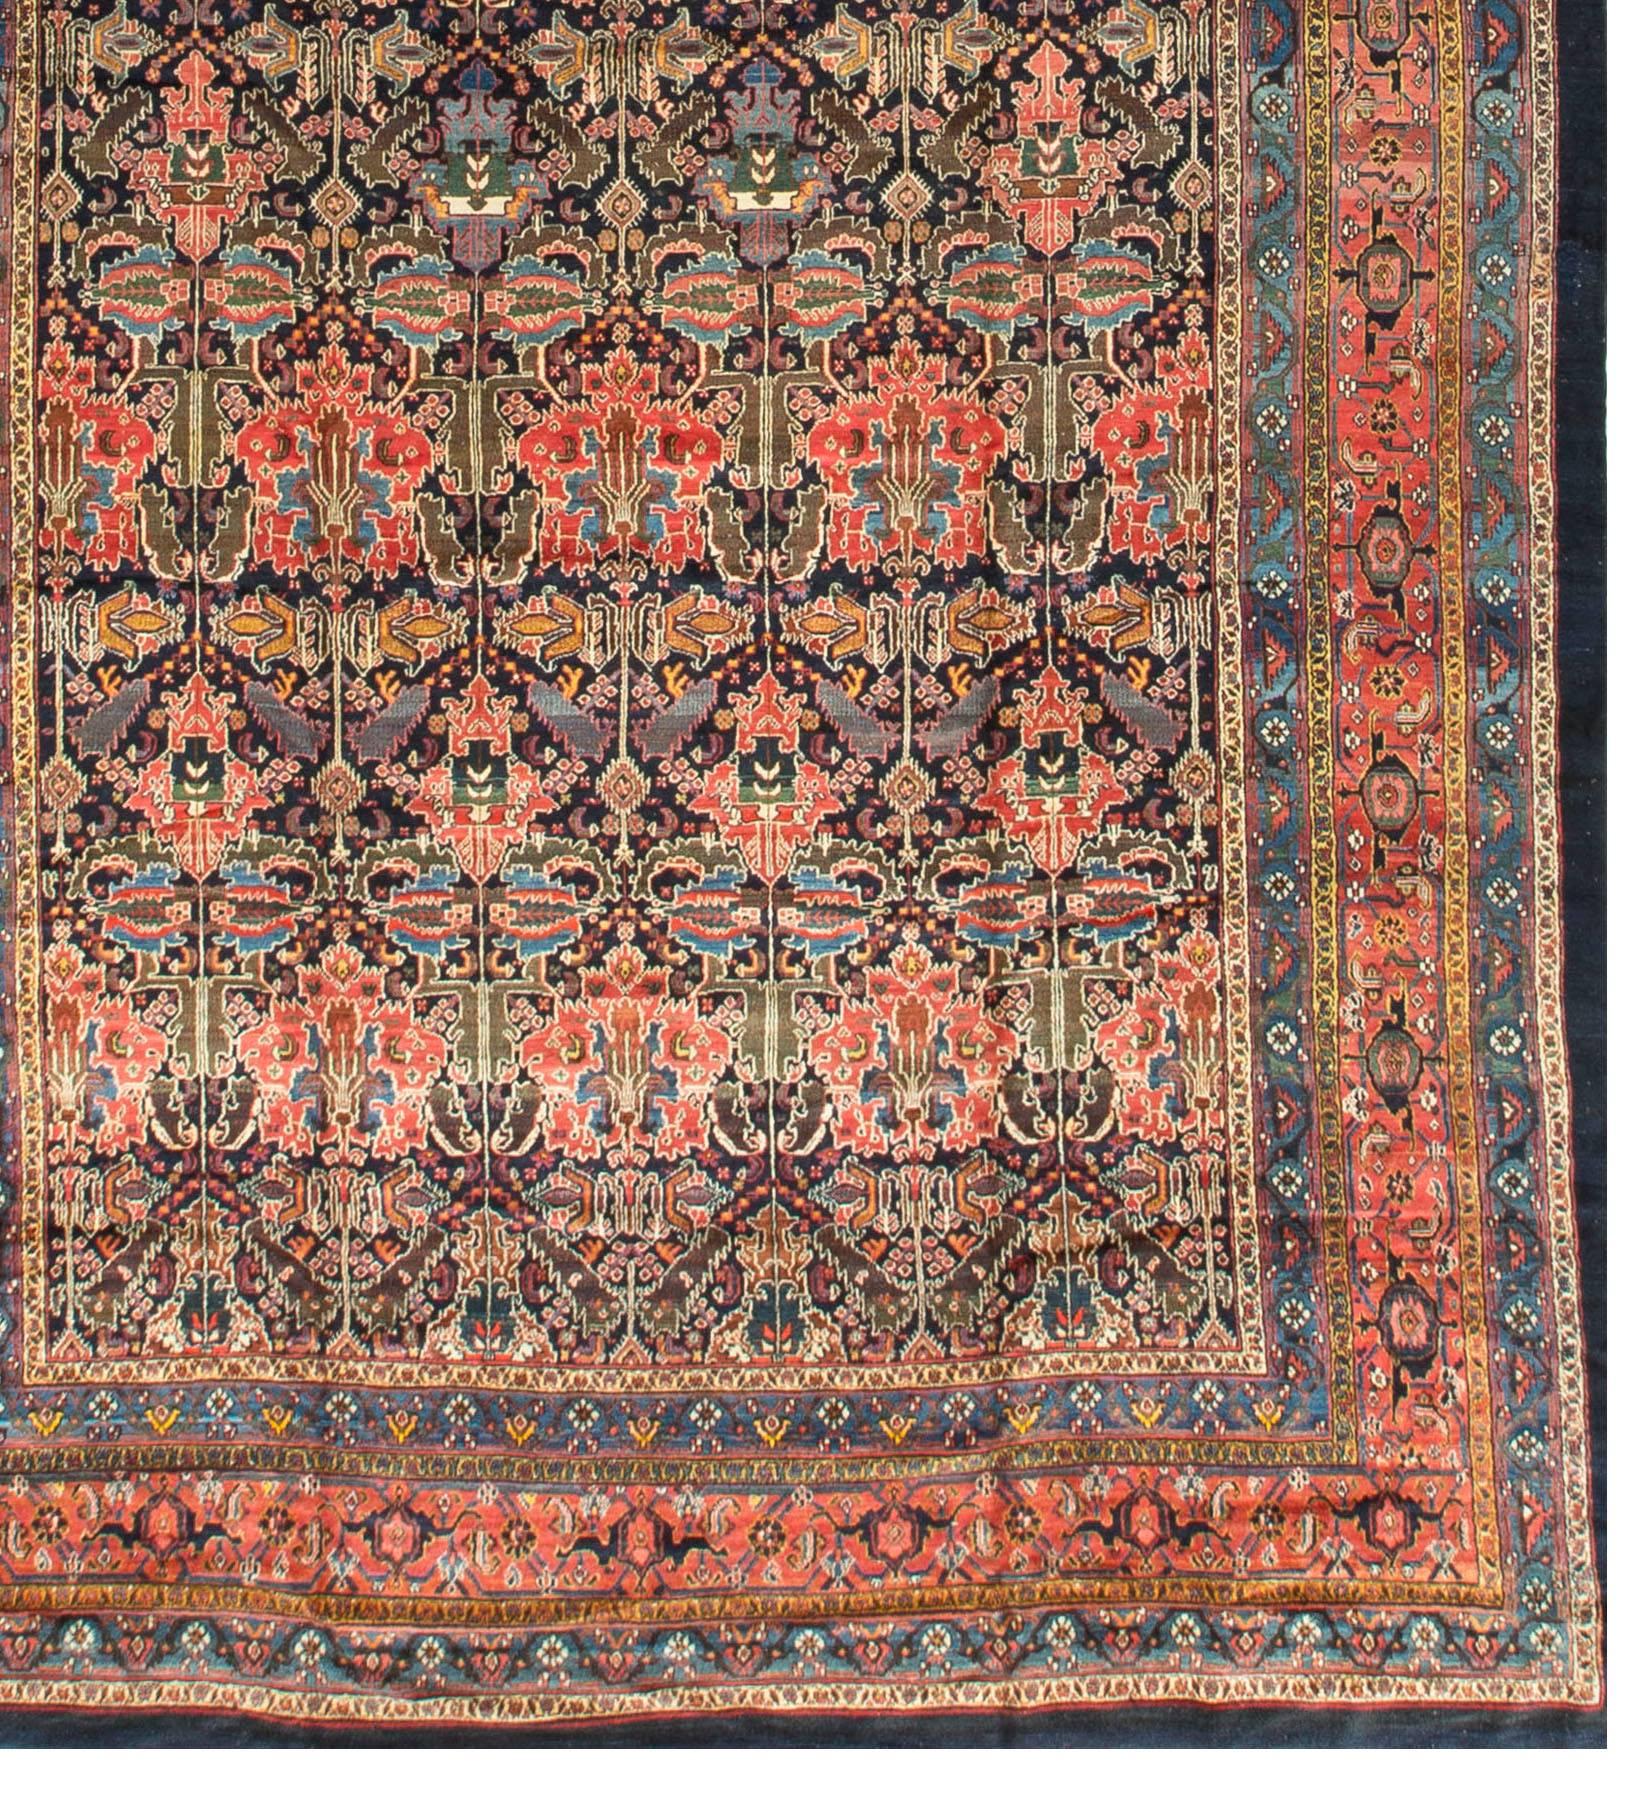 Antique Persian Bakhtiari rug, circa 1890. A wonderful antique Persian Bakhtiari handwoven rug. The deep navy ground field bursting with floral themed shapes that give a central strength to the overall design. The beautiful main triple borders each